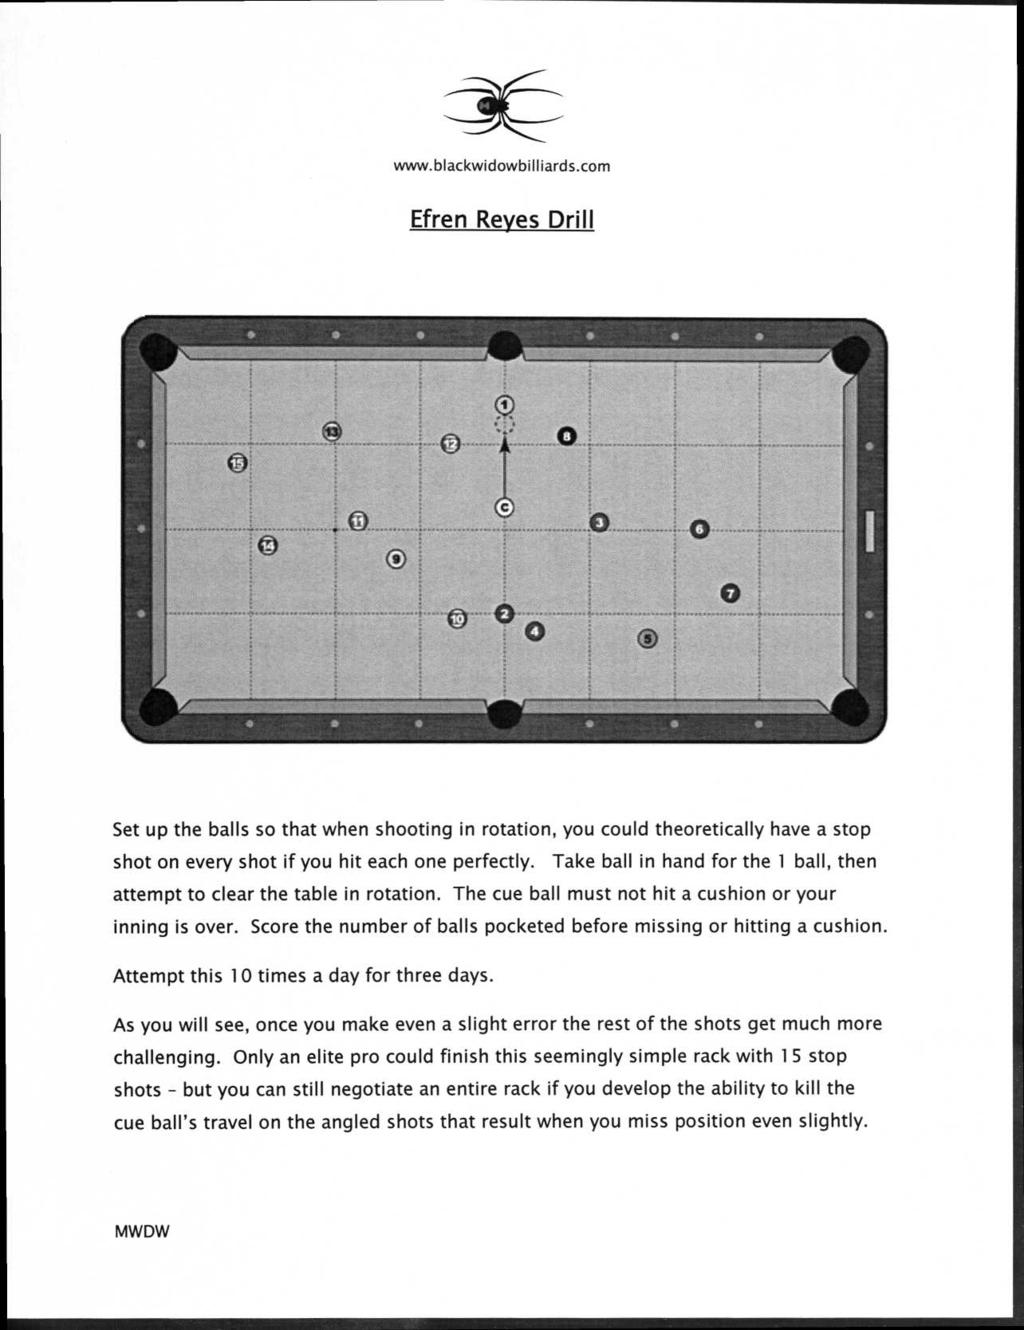 Efren Reyes Drill Set up the balls so that when shooting in rotation, you could theoretically have a stop shot on every shot if you hit each one perfectly.